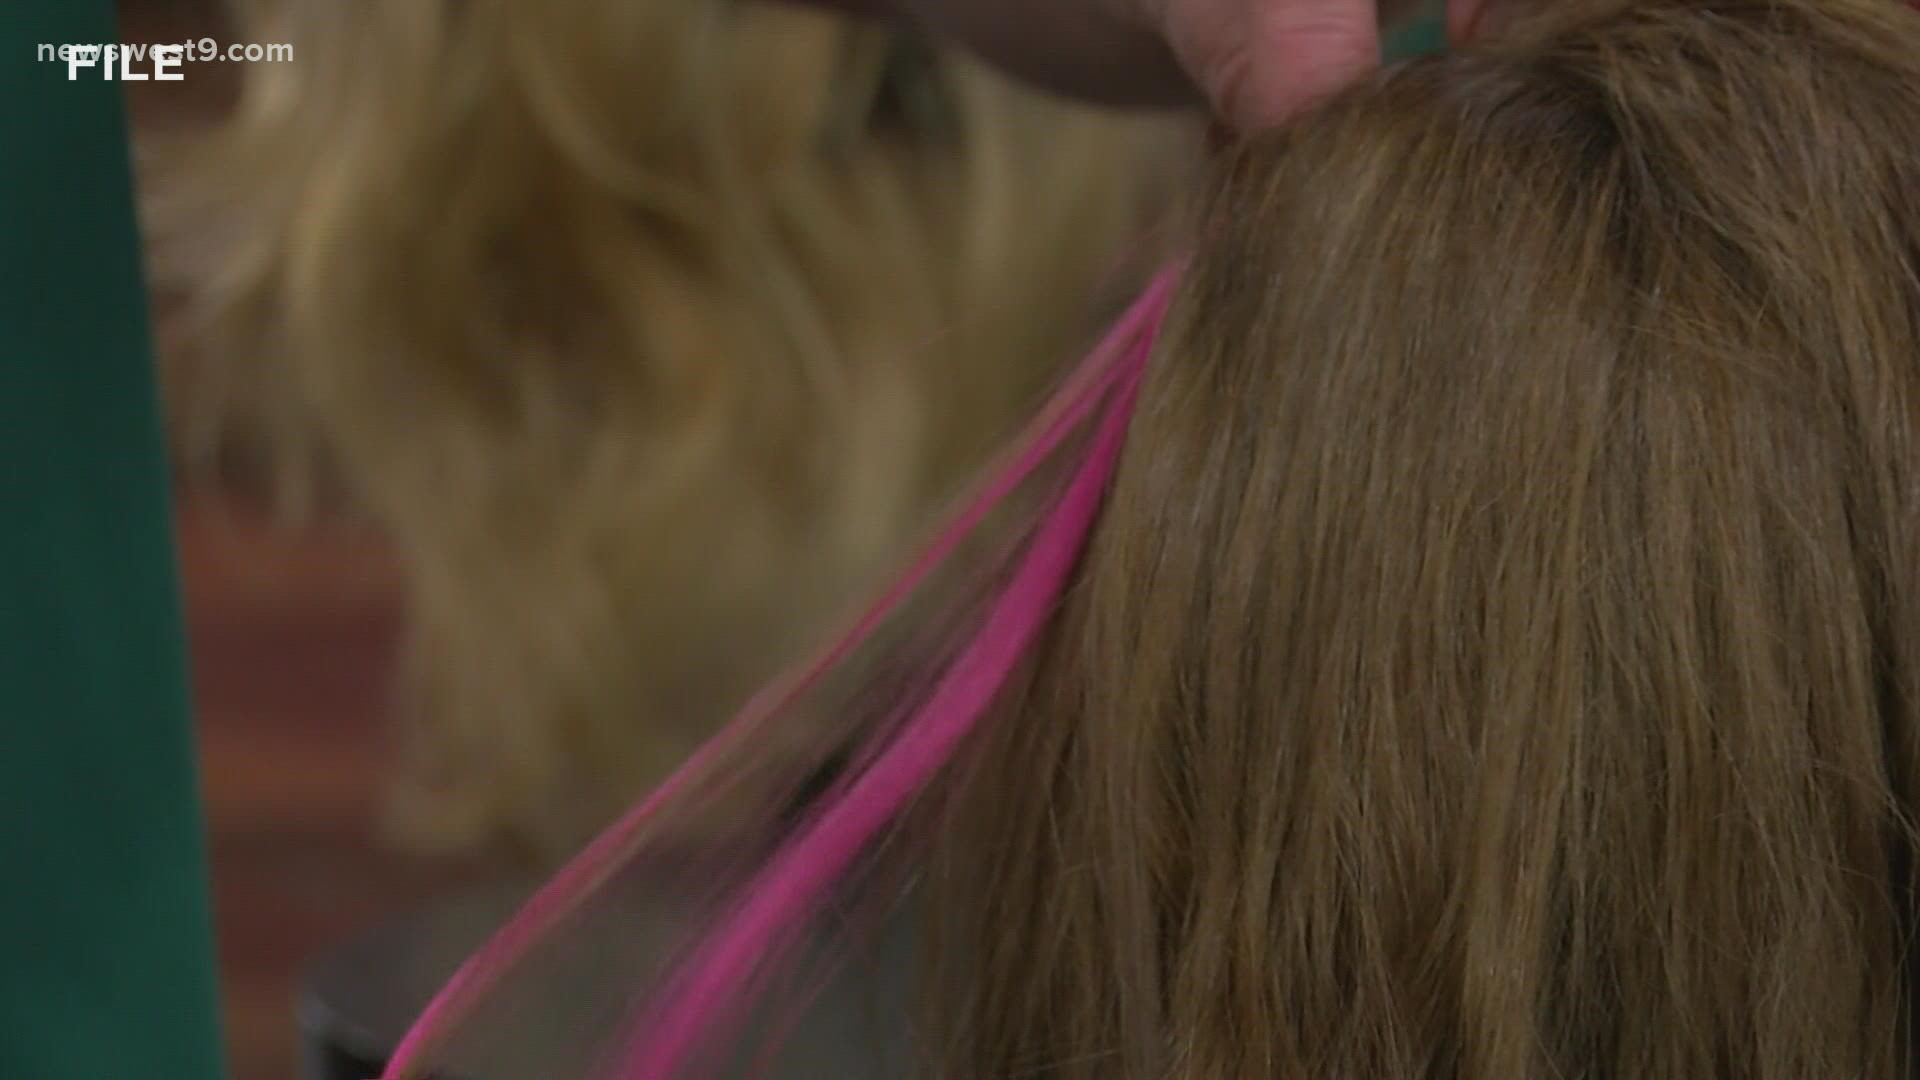 Cosmetology students at the college will offering up these temporary hair extensions for $5 for the rest of October.